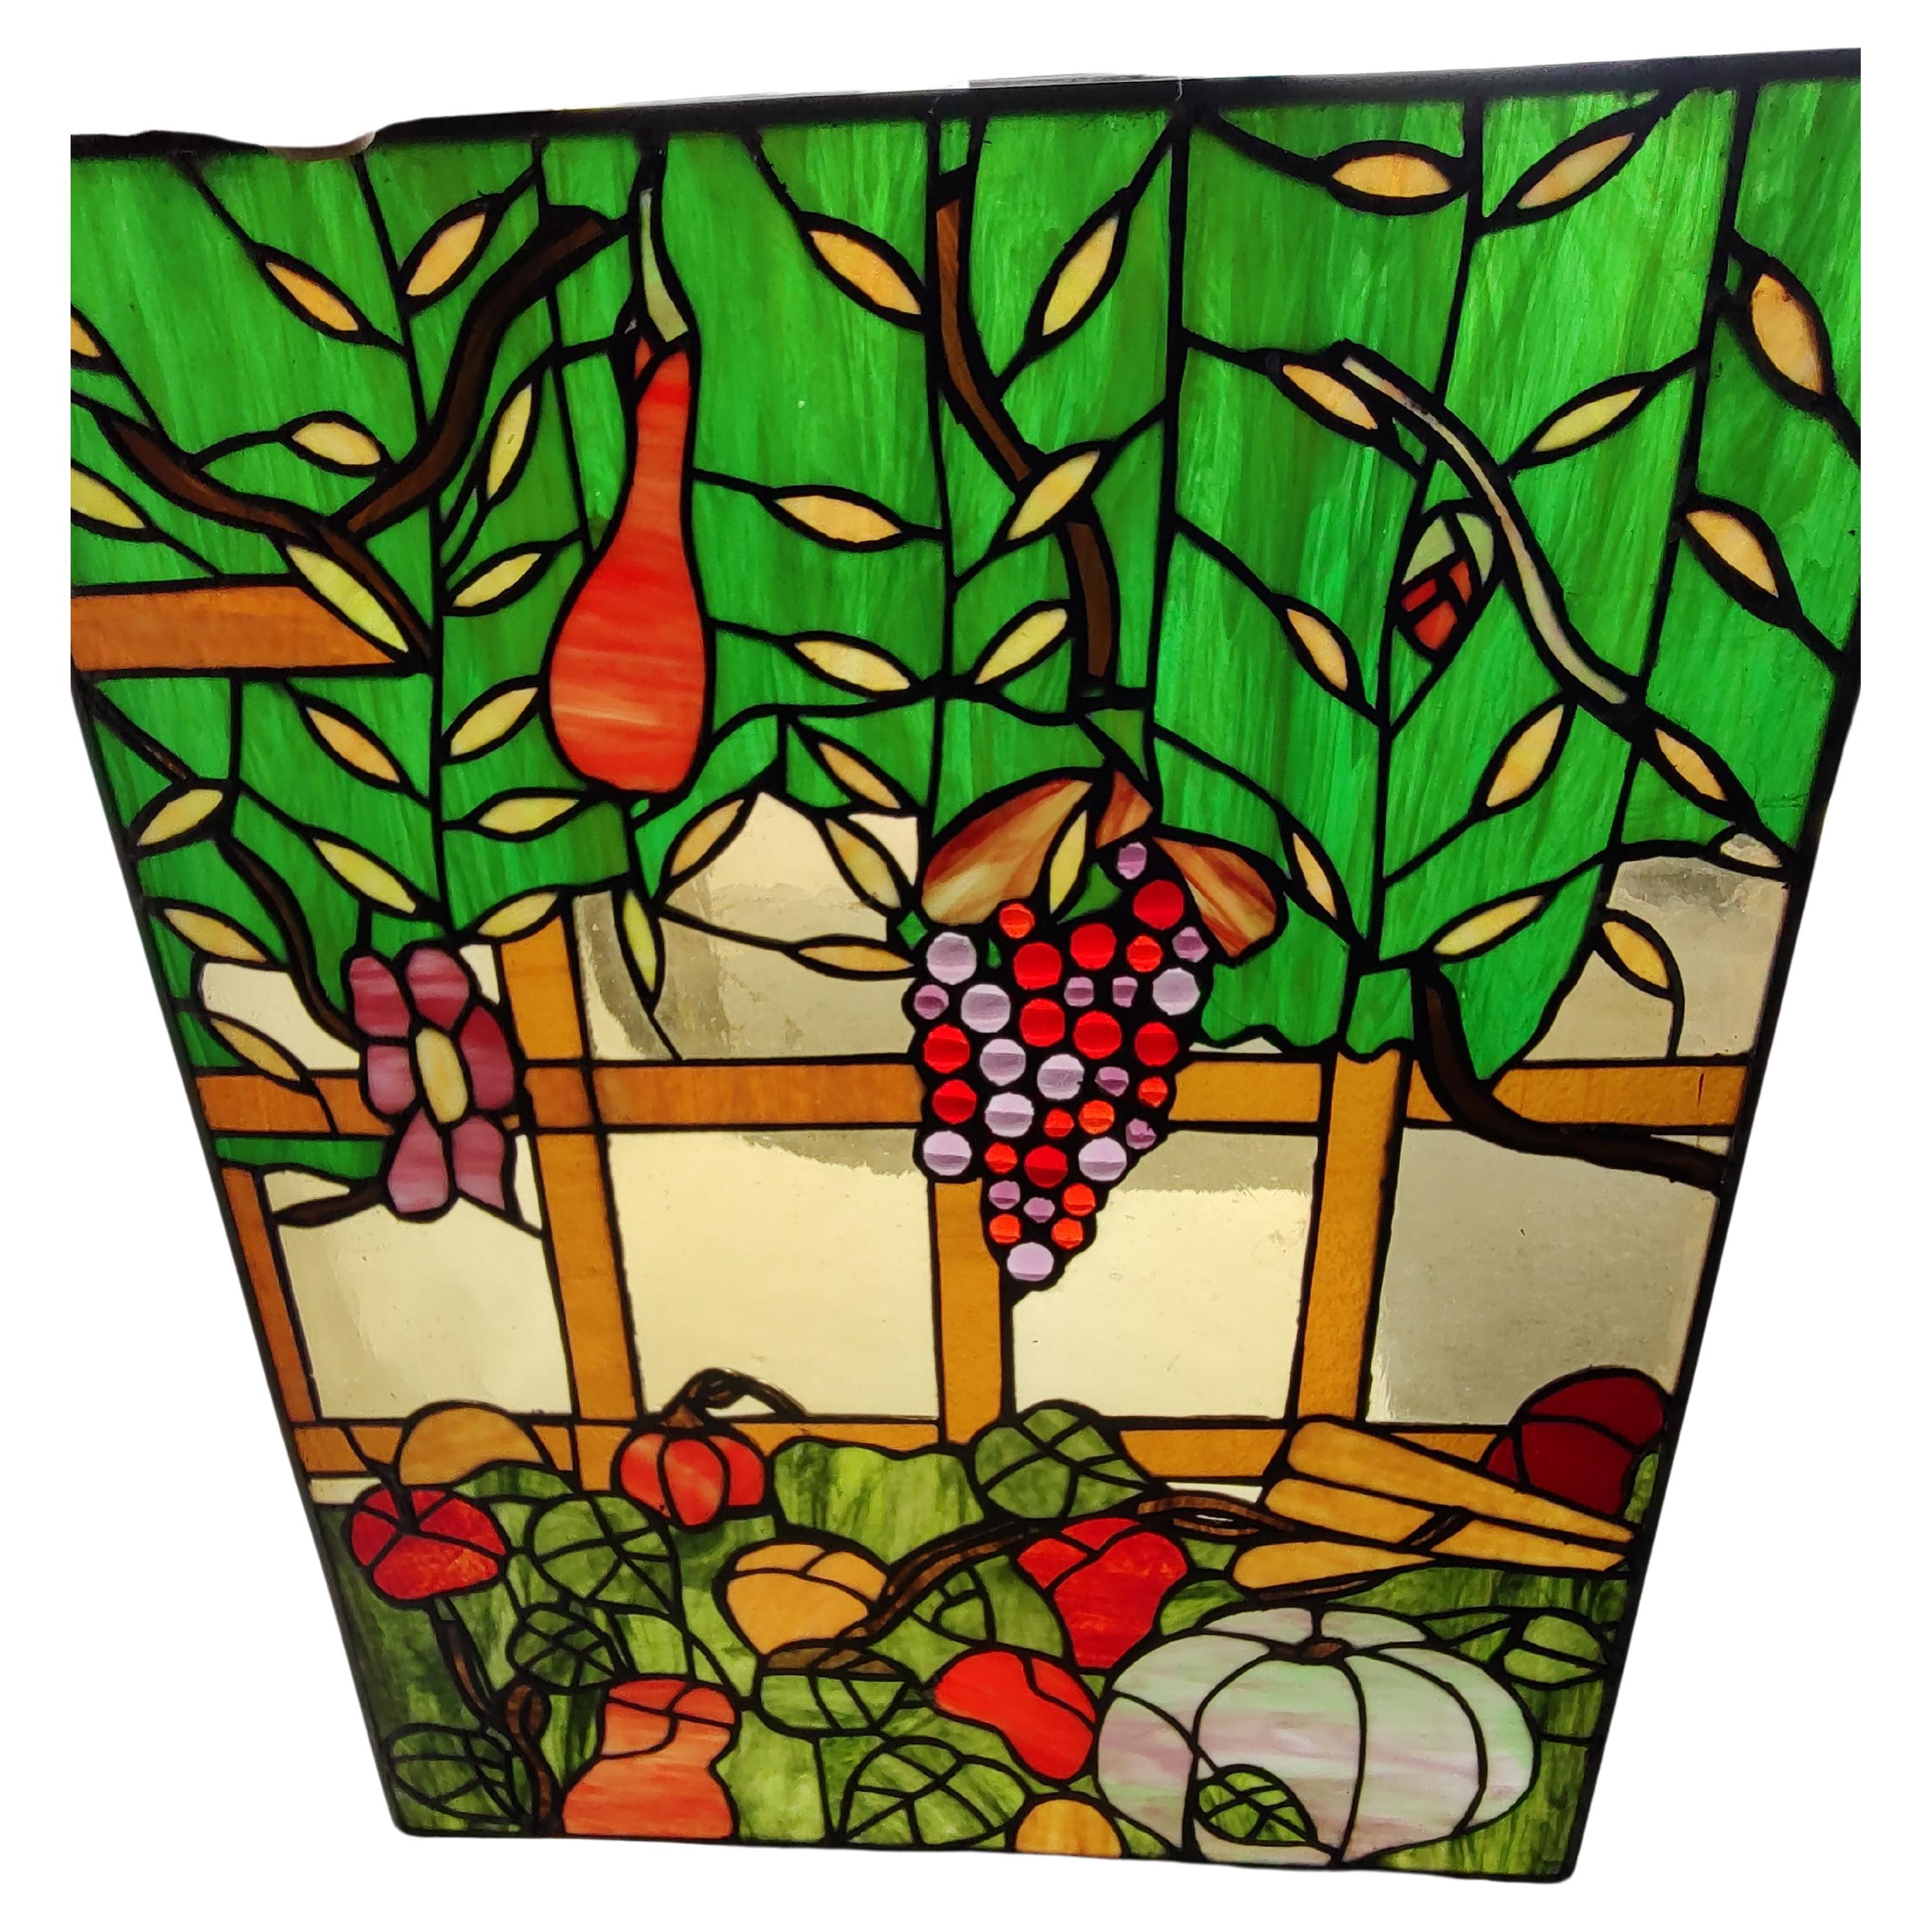 Stunning set of stained glass window panels. This listing is for 1 panel. We have 6 available, all in separate listings. Fabulous colors and amazing craftsmanship with Mid-Century Modern style. Striking when sunlight filters thru. Fruits and